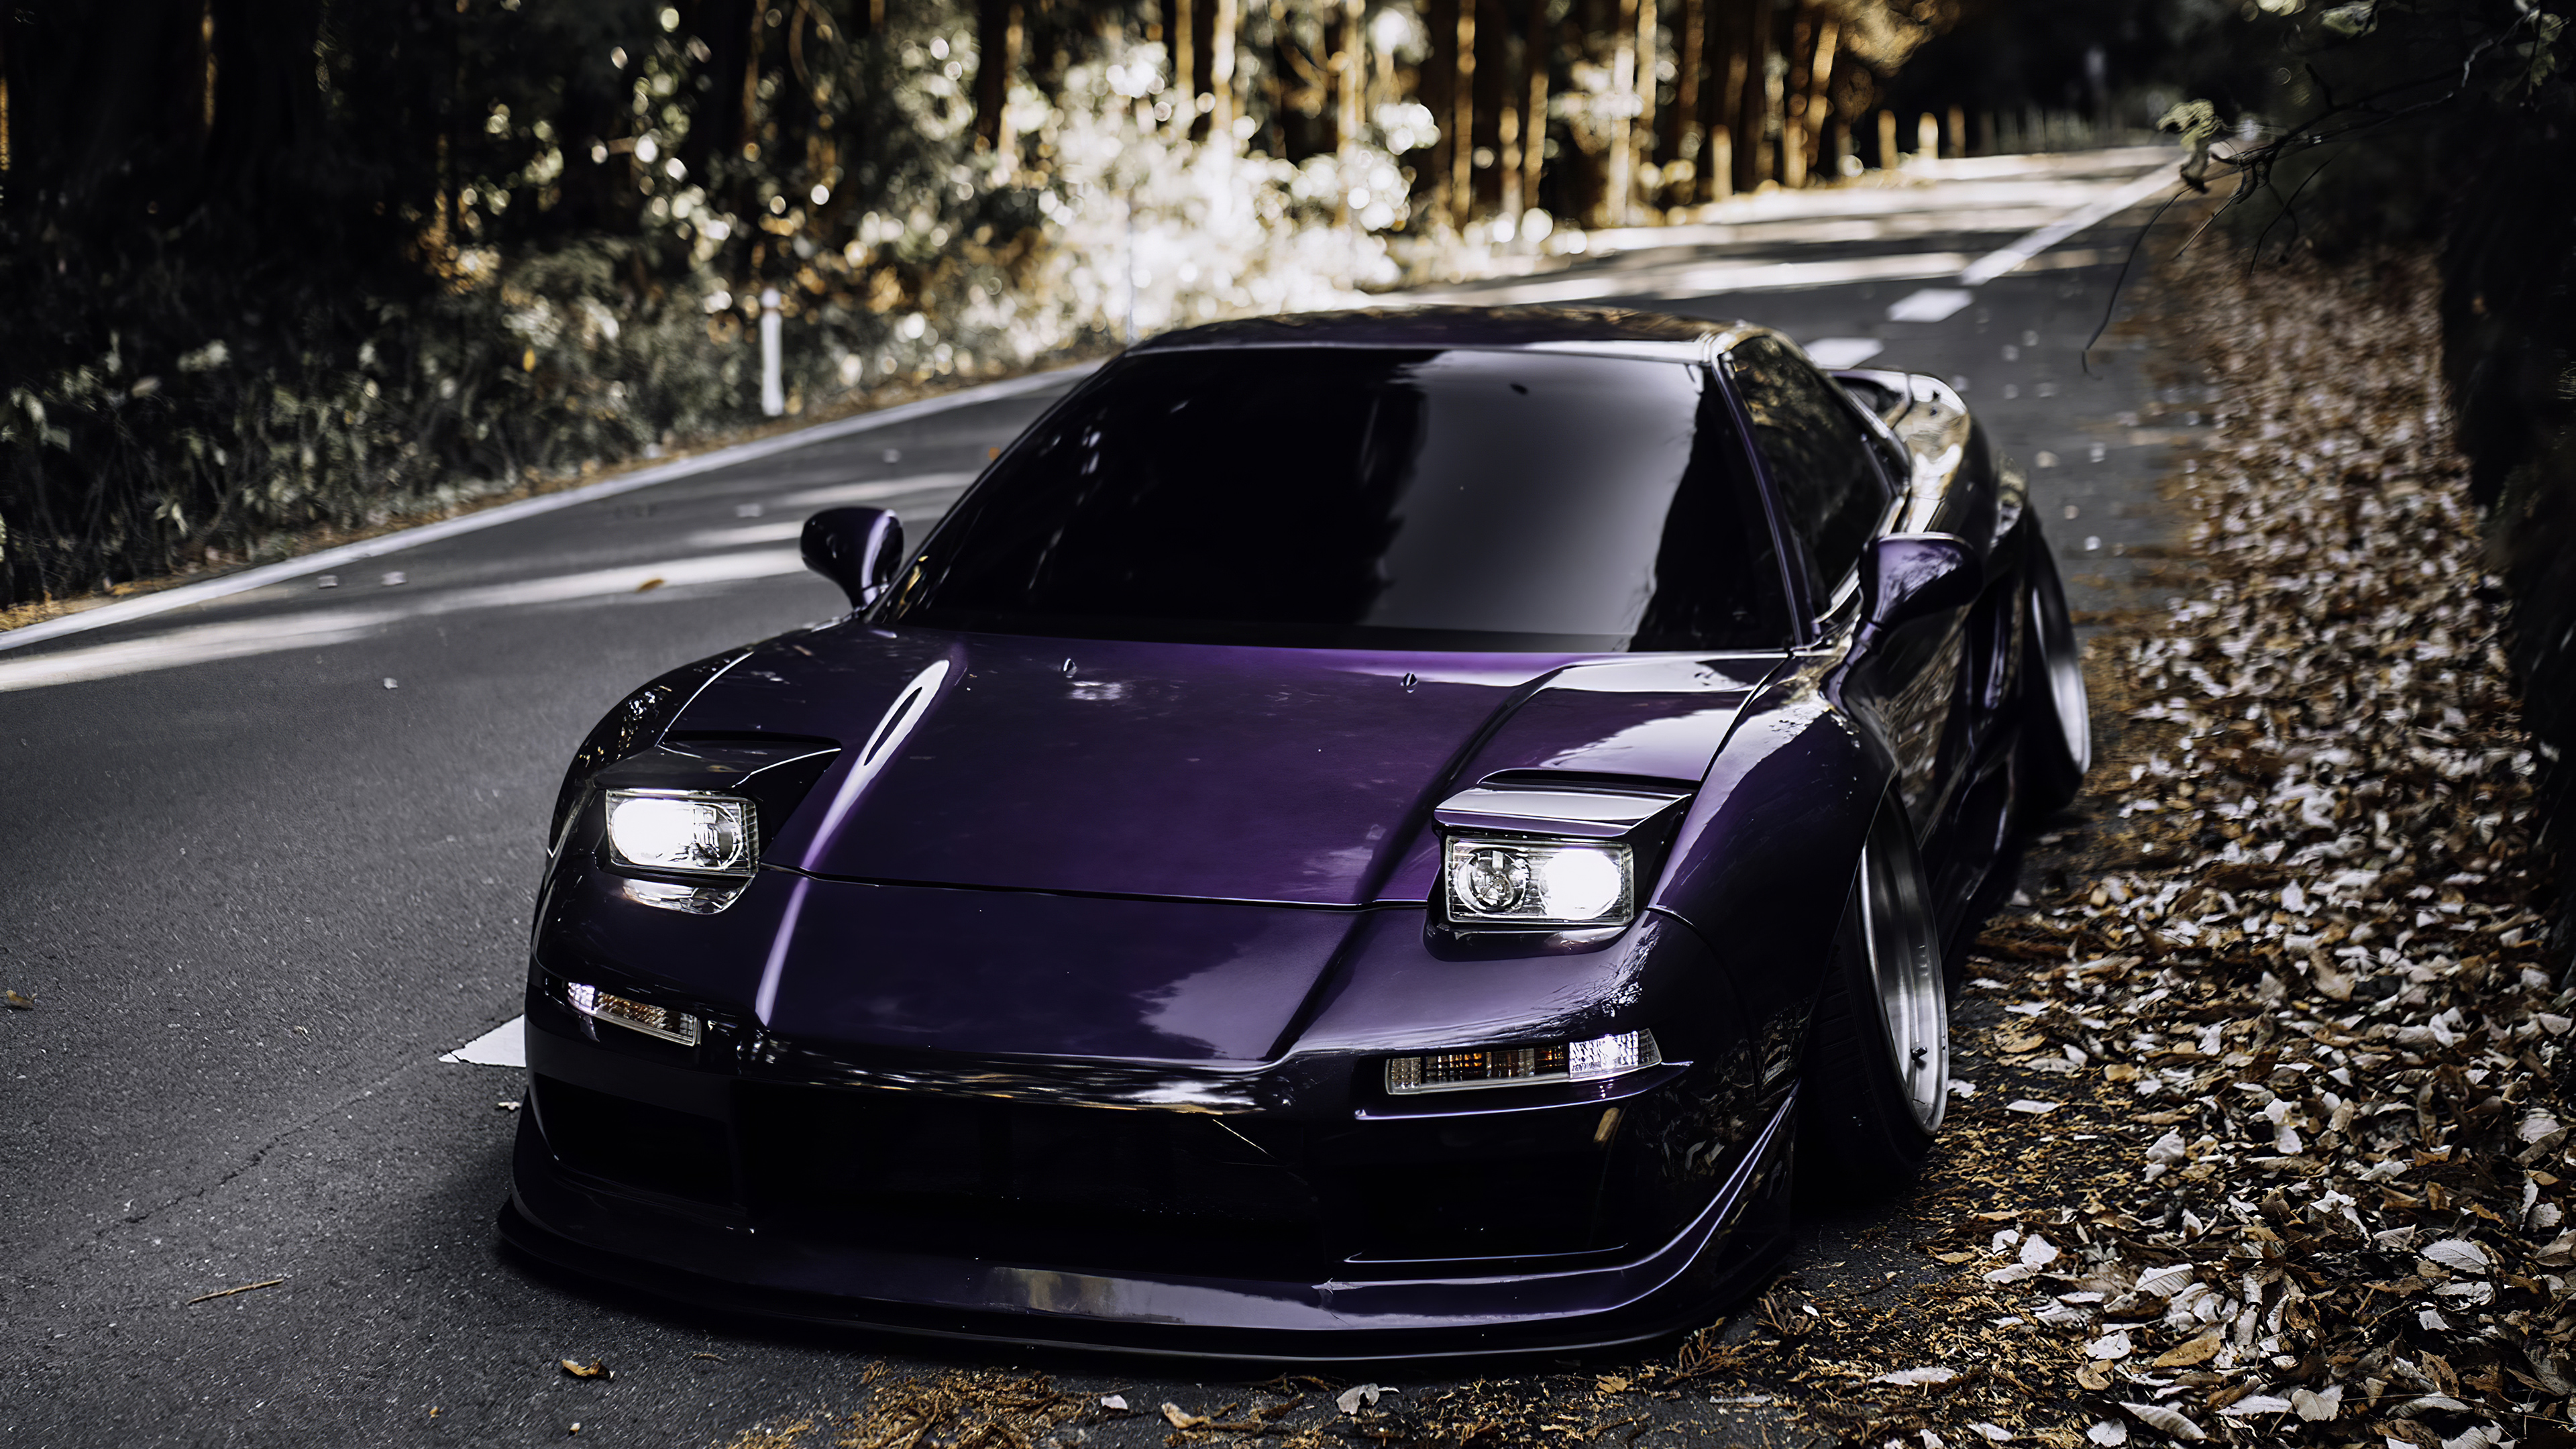 Free photo Undervalued Acura NSX in purple stands on the curb with fallen leaves